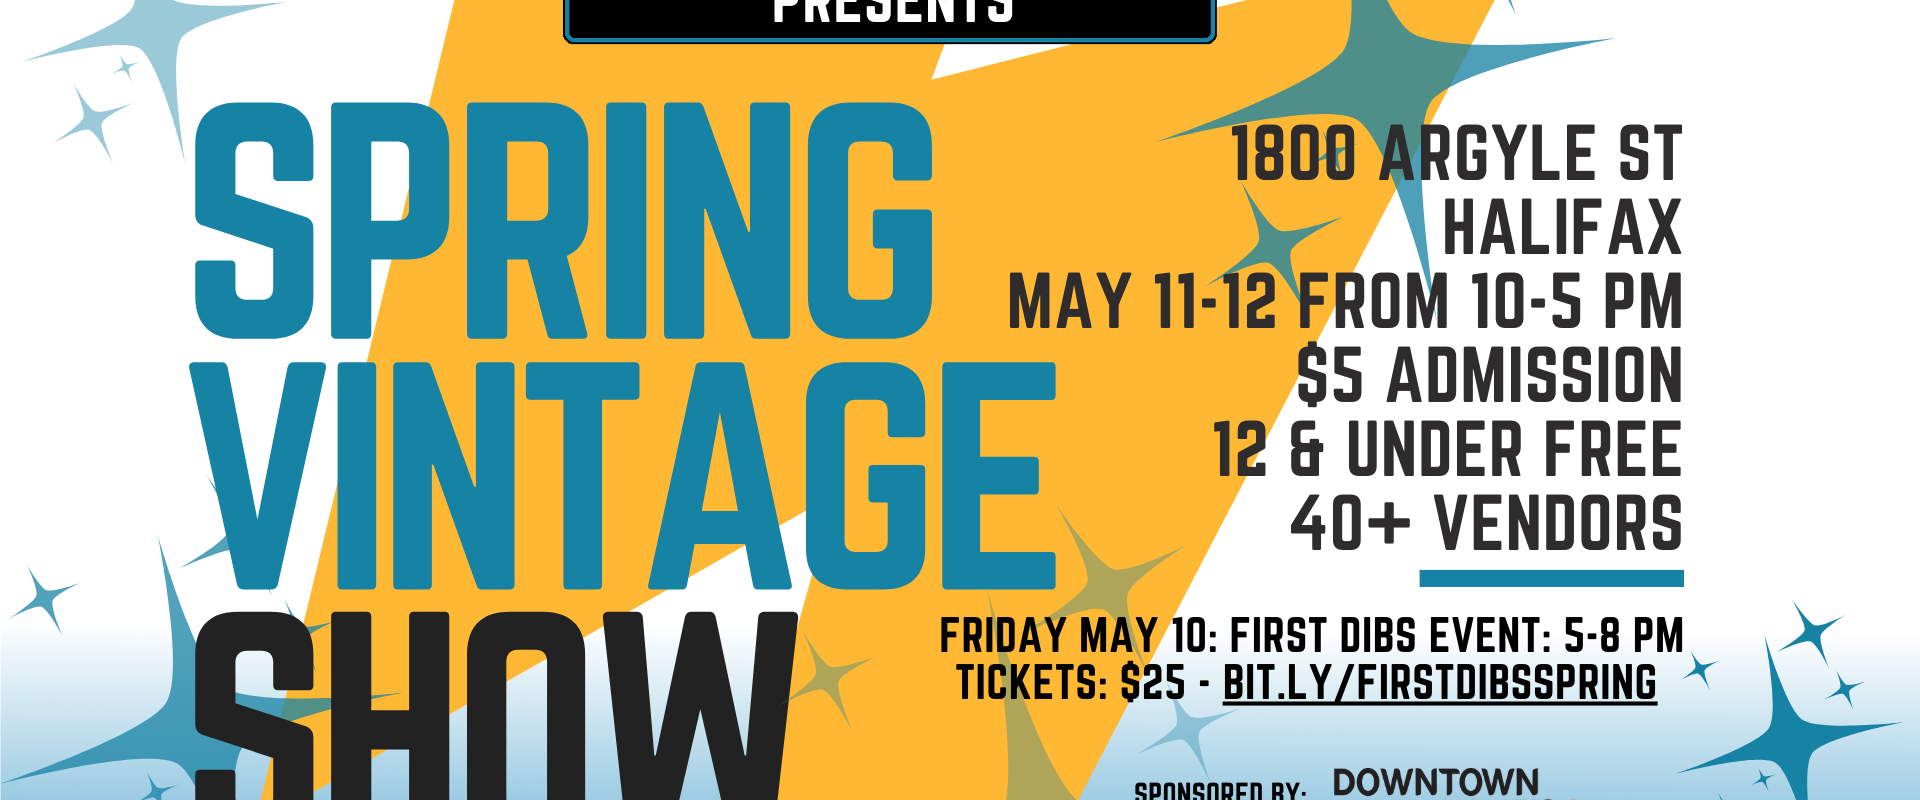 The Curio Collective Spring Vintage Show May 11-12 10 - 5pm at 1800 Argyle St. $5 Admission